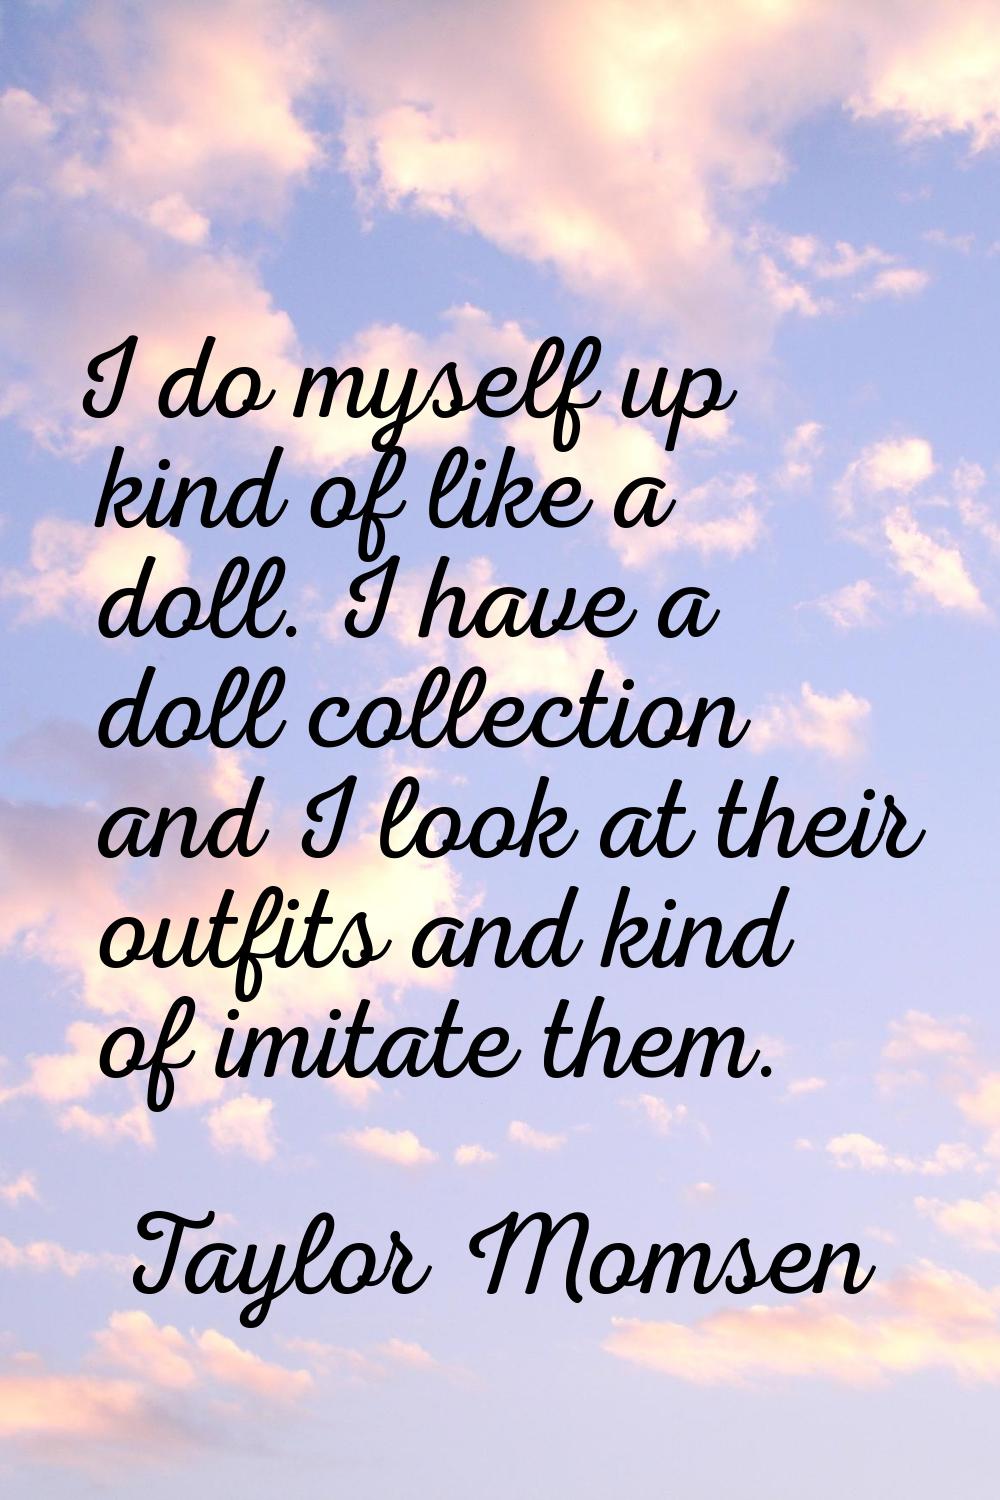 I do myself up kind of like a doll. I have a doll collection and I look at their outfits and kind o